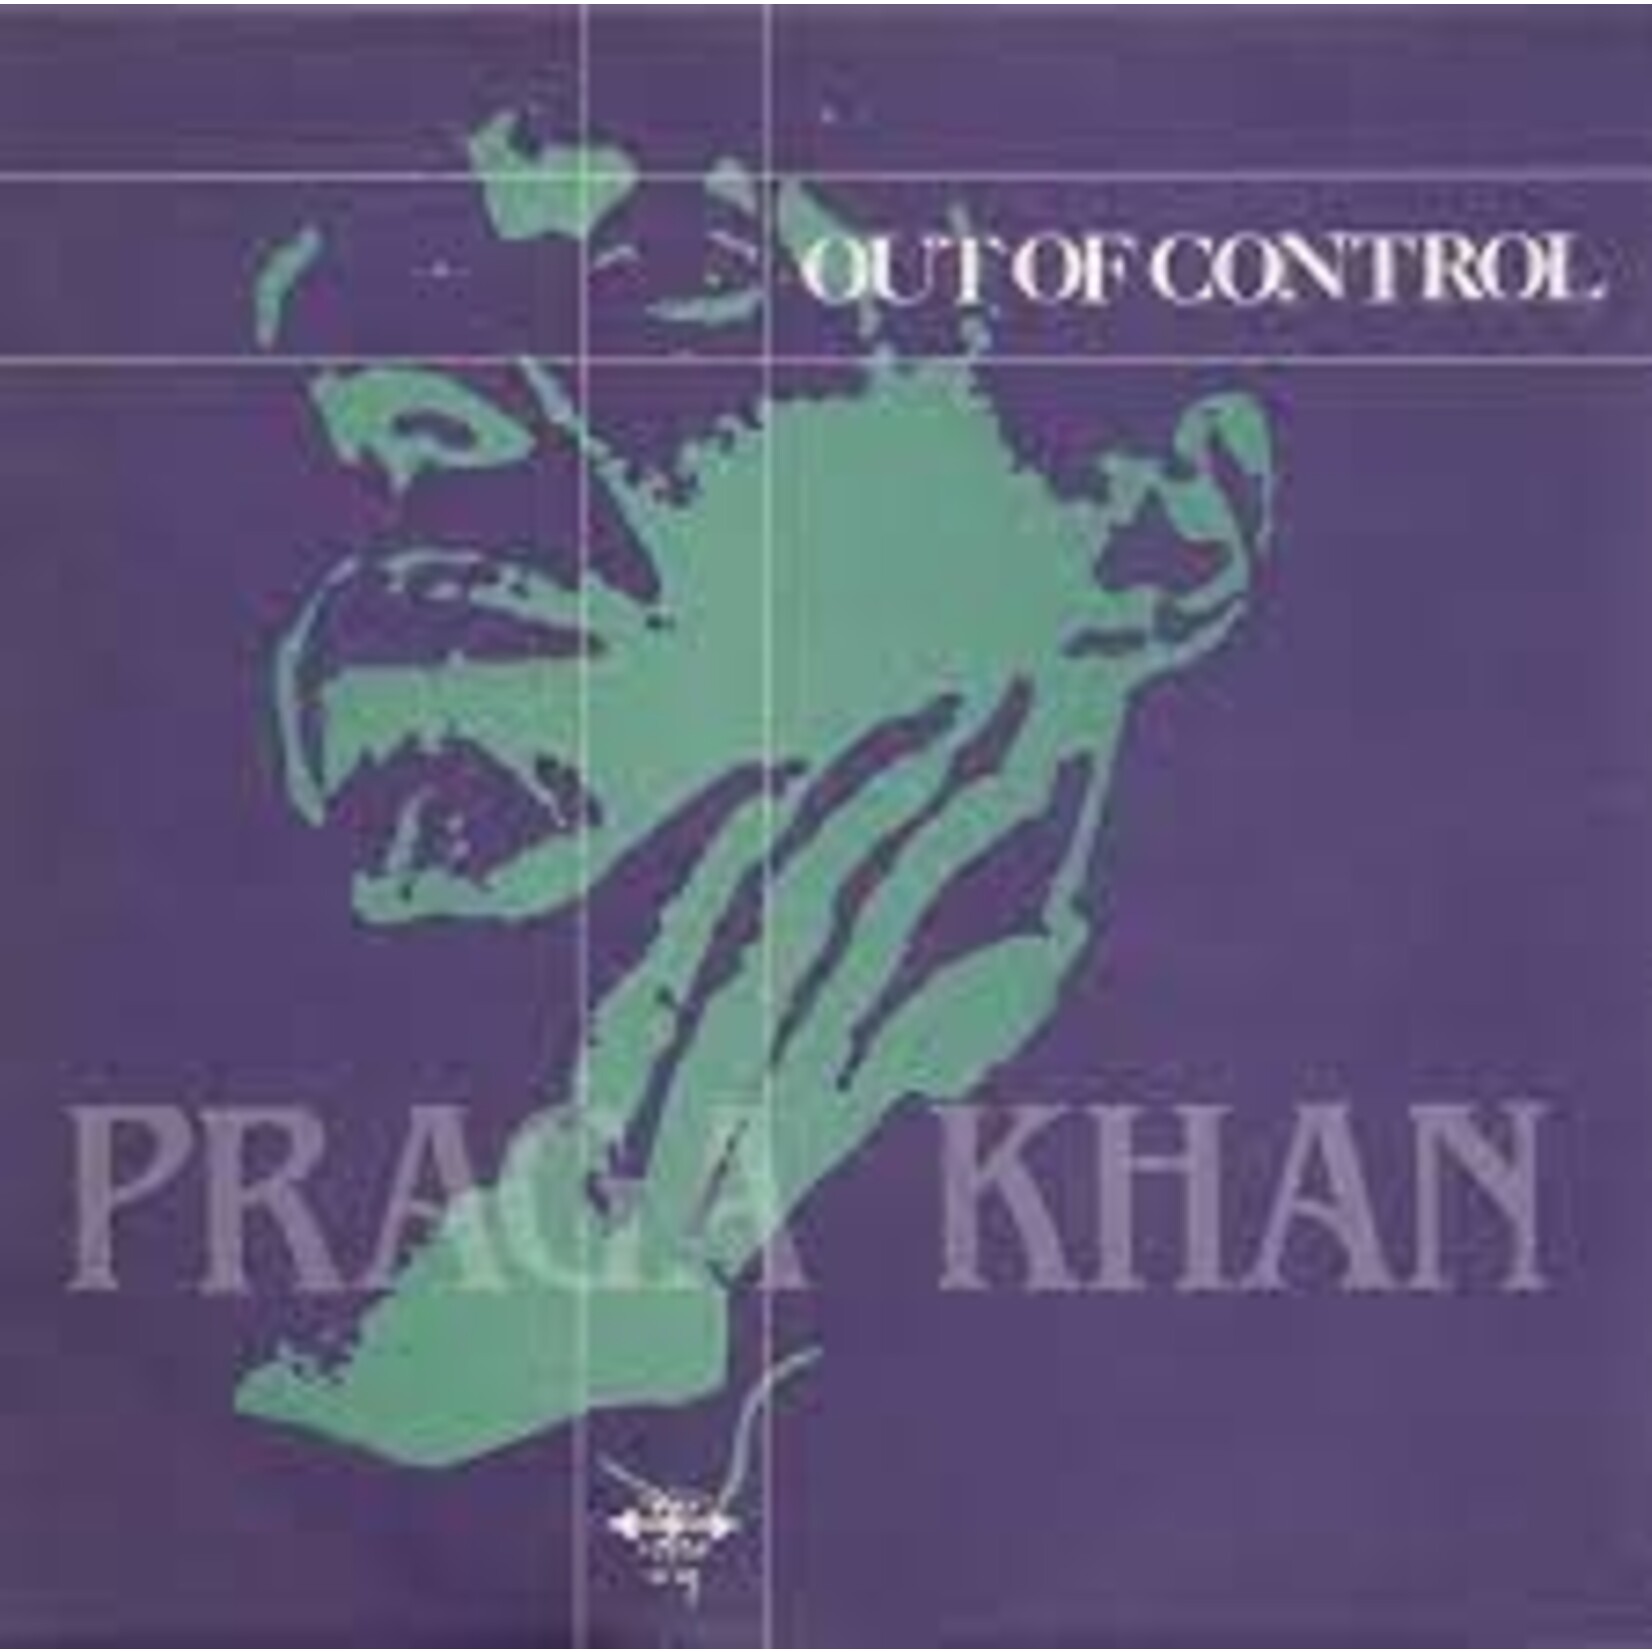 PRAGA KHAN - echoes/out of control 12"ep